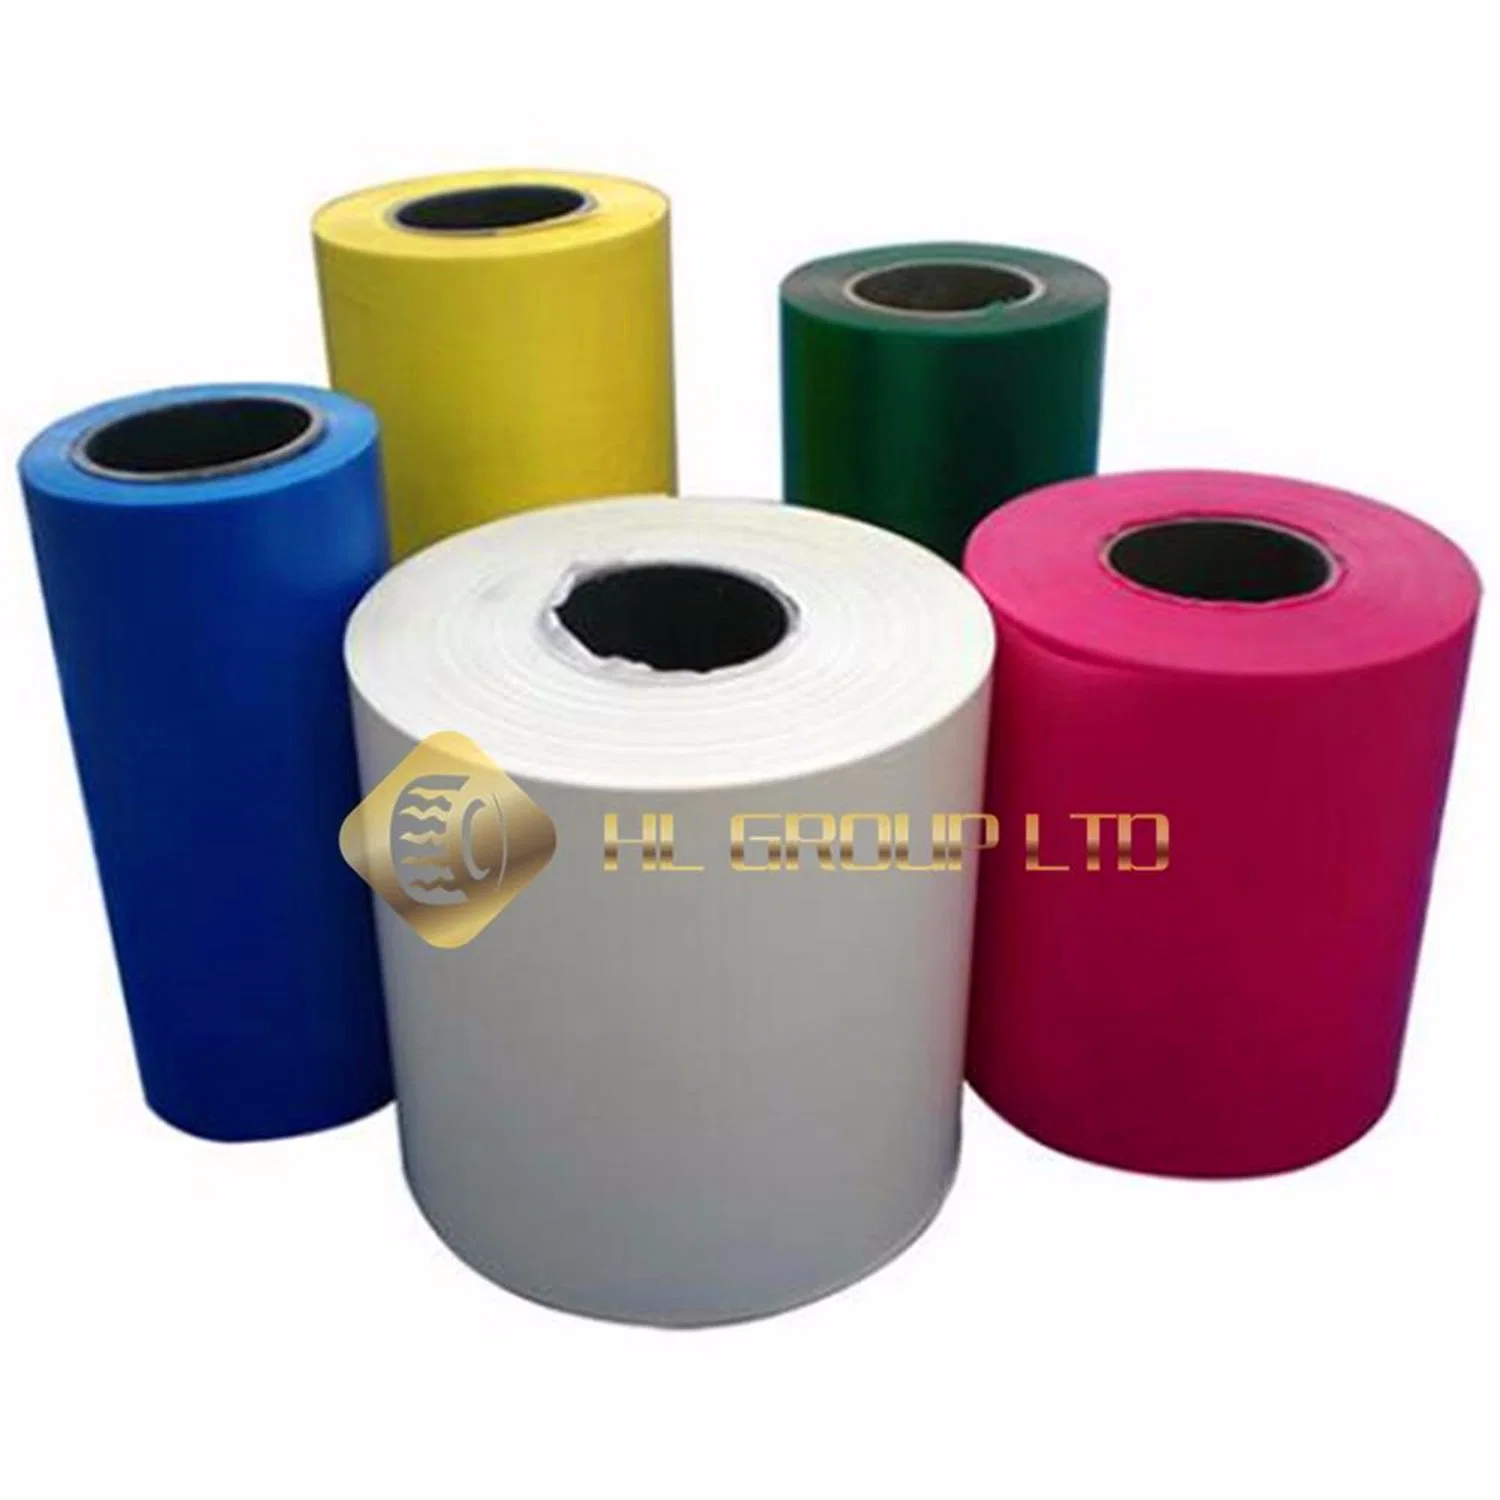 PE Rubber Insulating Film Used for Temporary Isolation Between Rubber Sheets in The Production Process of Rubber Enterprises